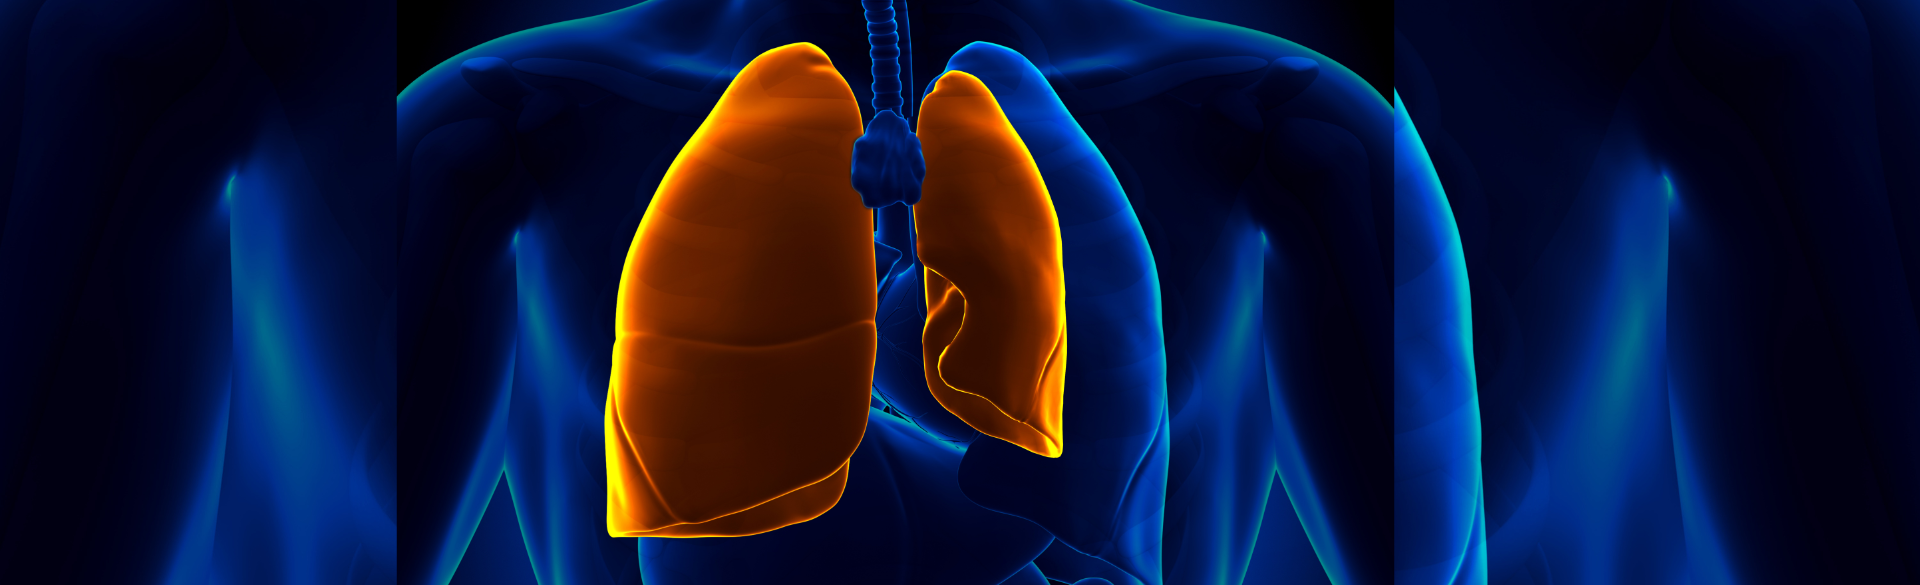 The CU researchers looked at survival rates for lung transplant patients versus adults who didn’t receive a lung transplant.